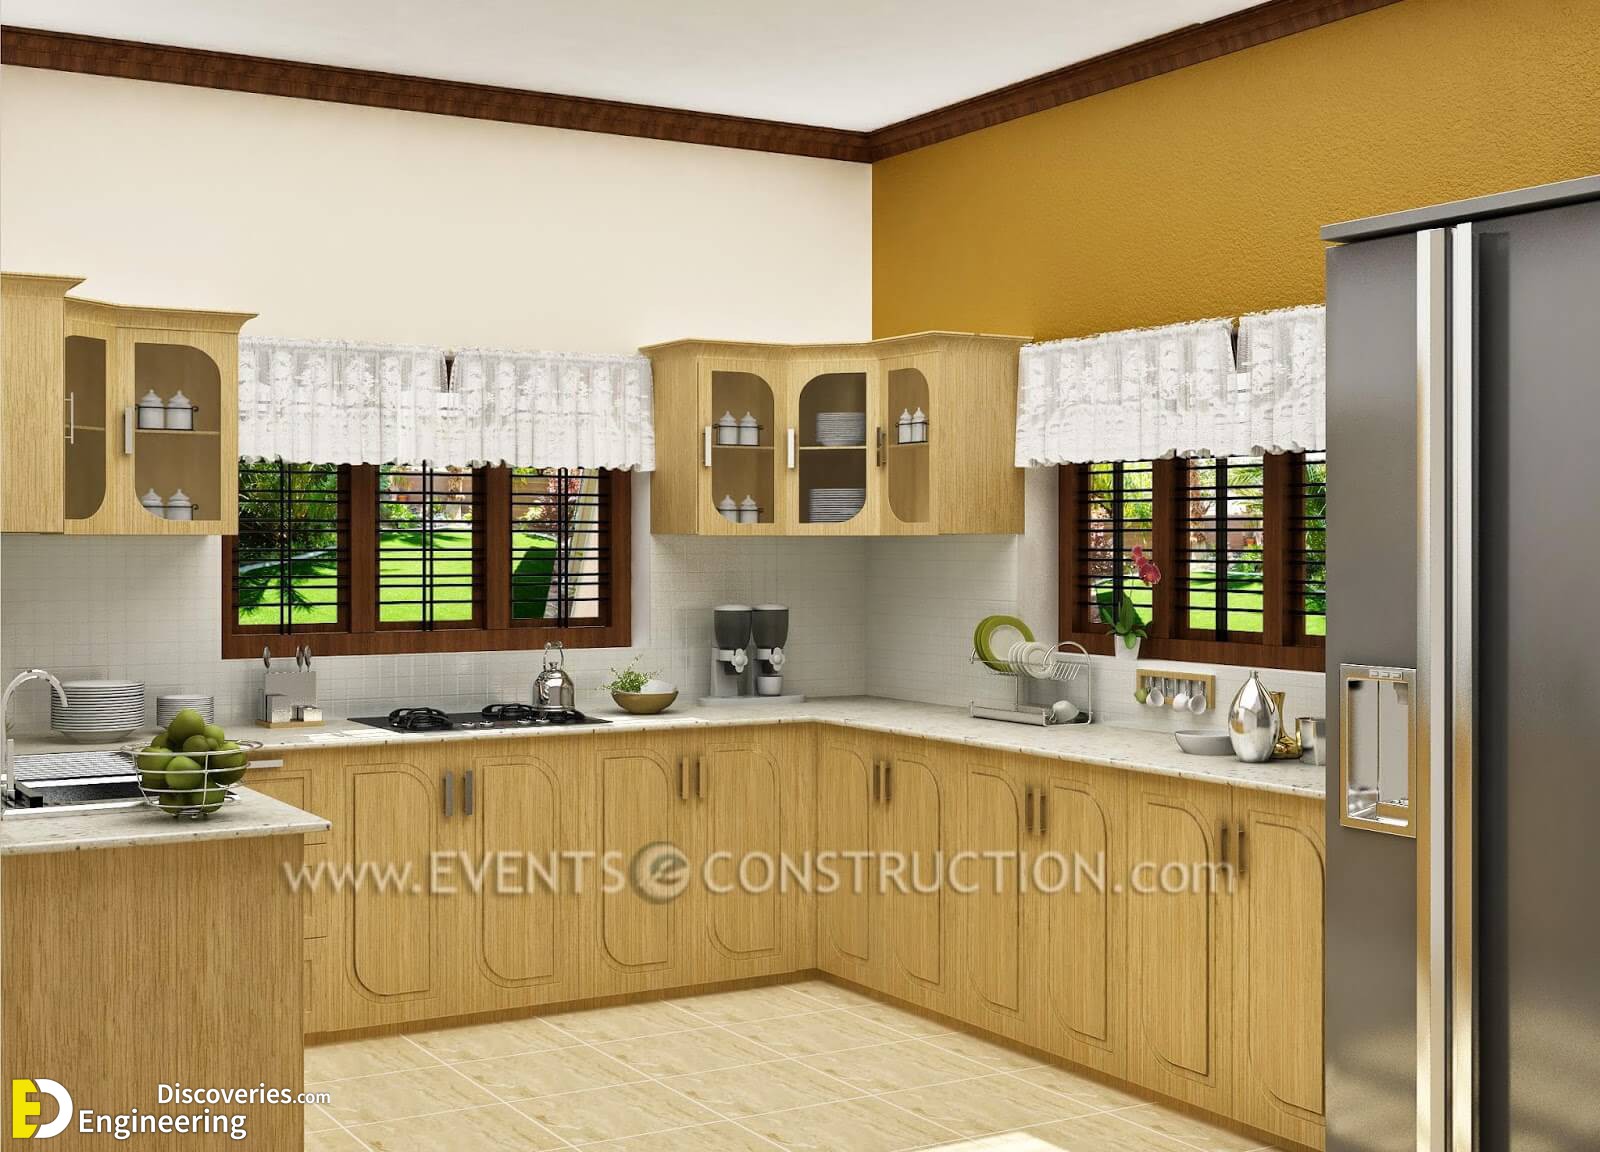 Modular kitchen by Kerala Home Design   Engineering Discoveries